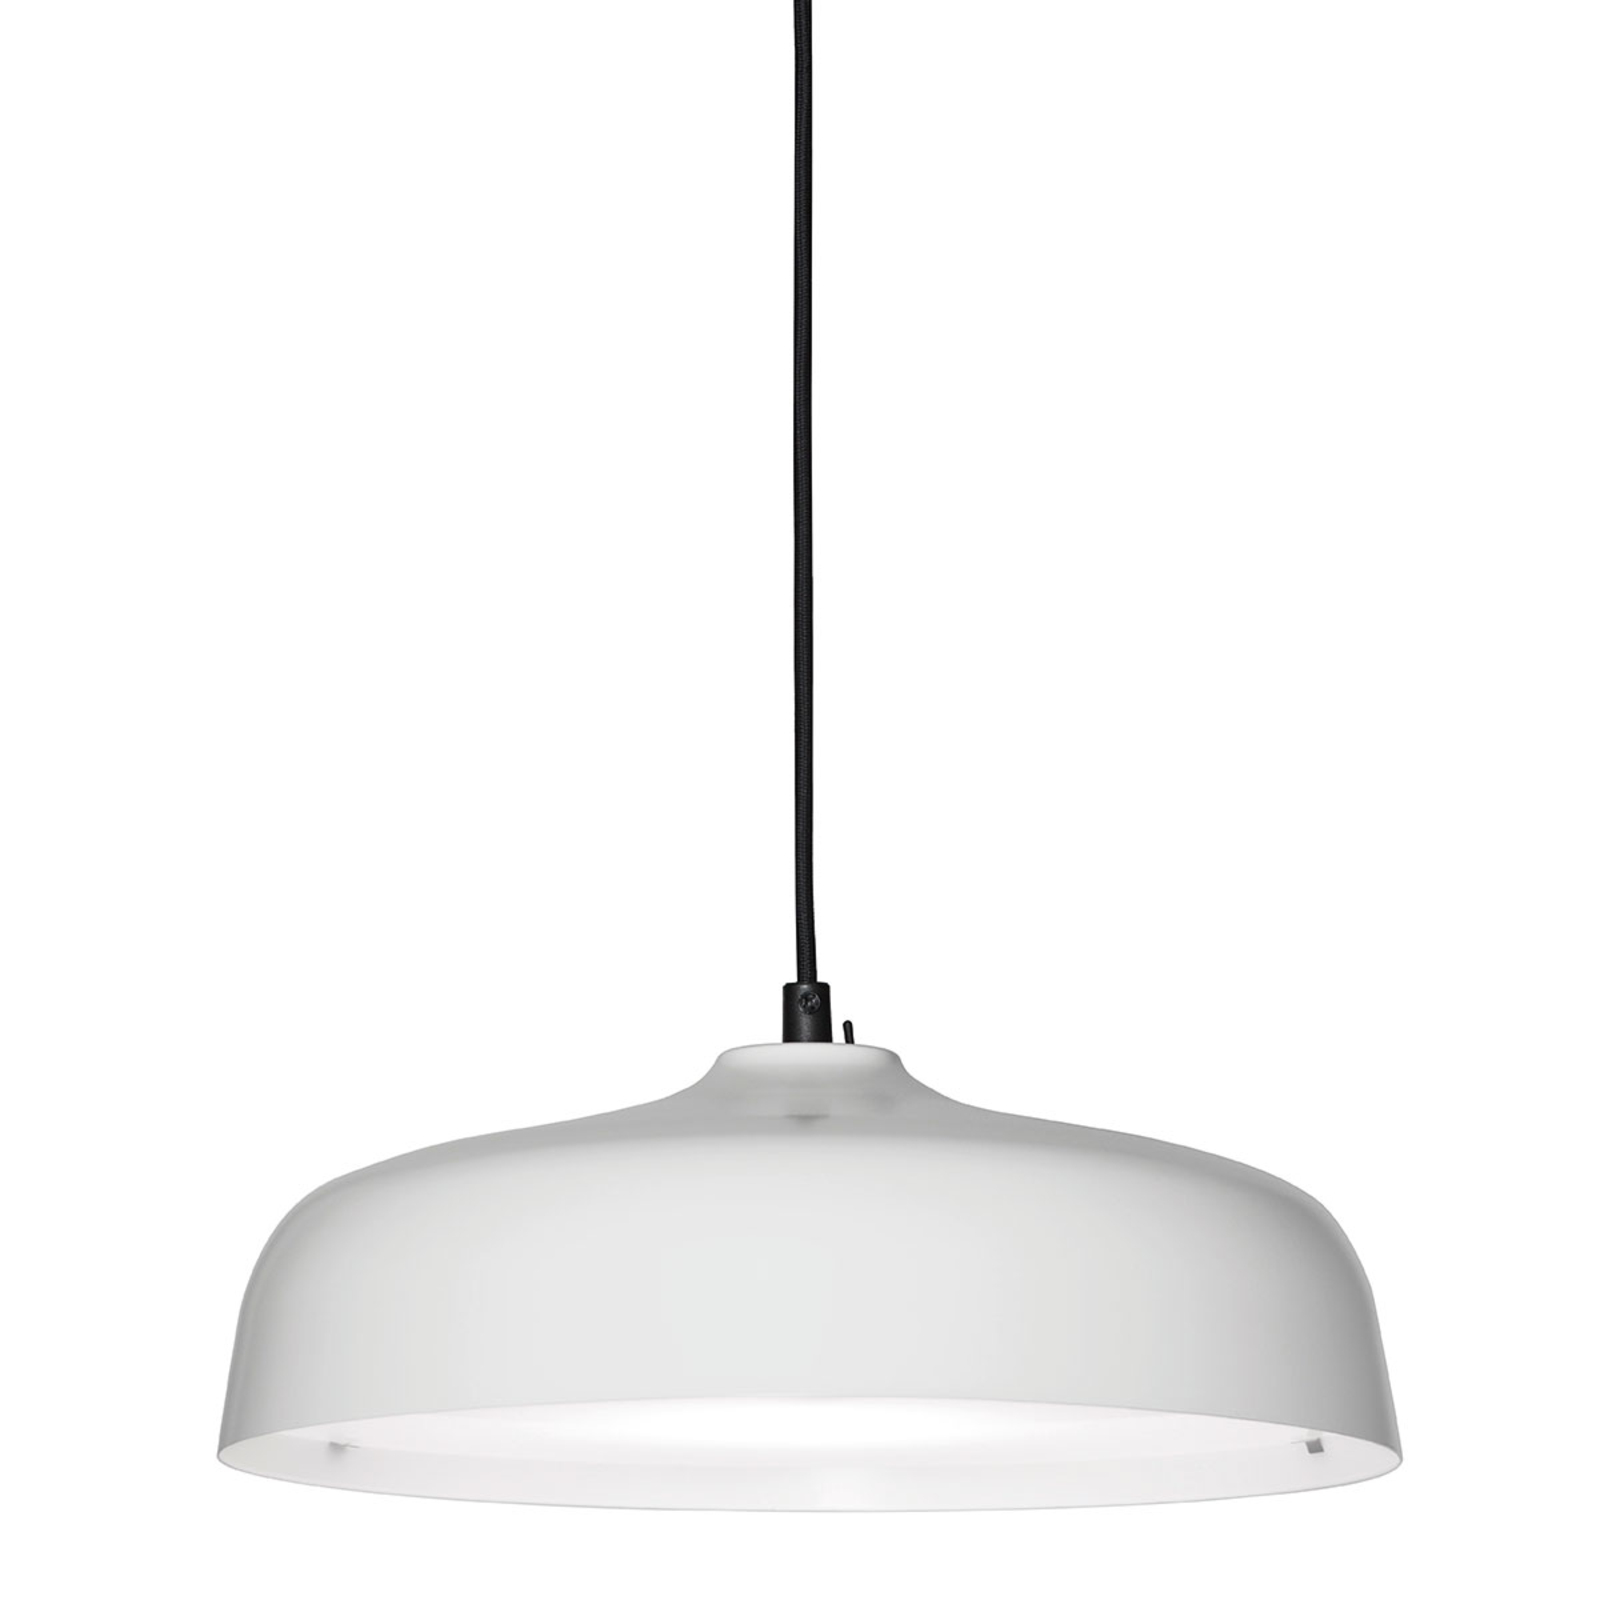 Candeeiro suspenso Innolux Candeo Air LED branco